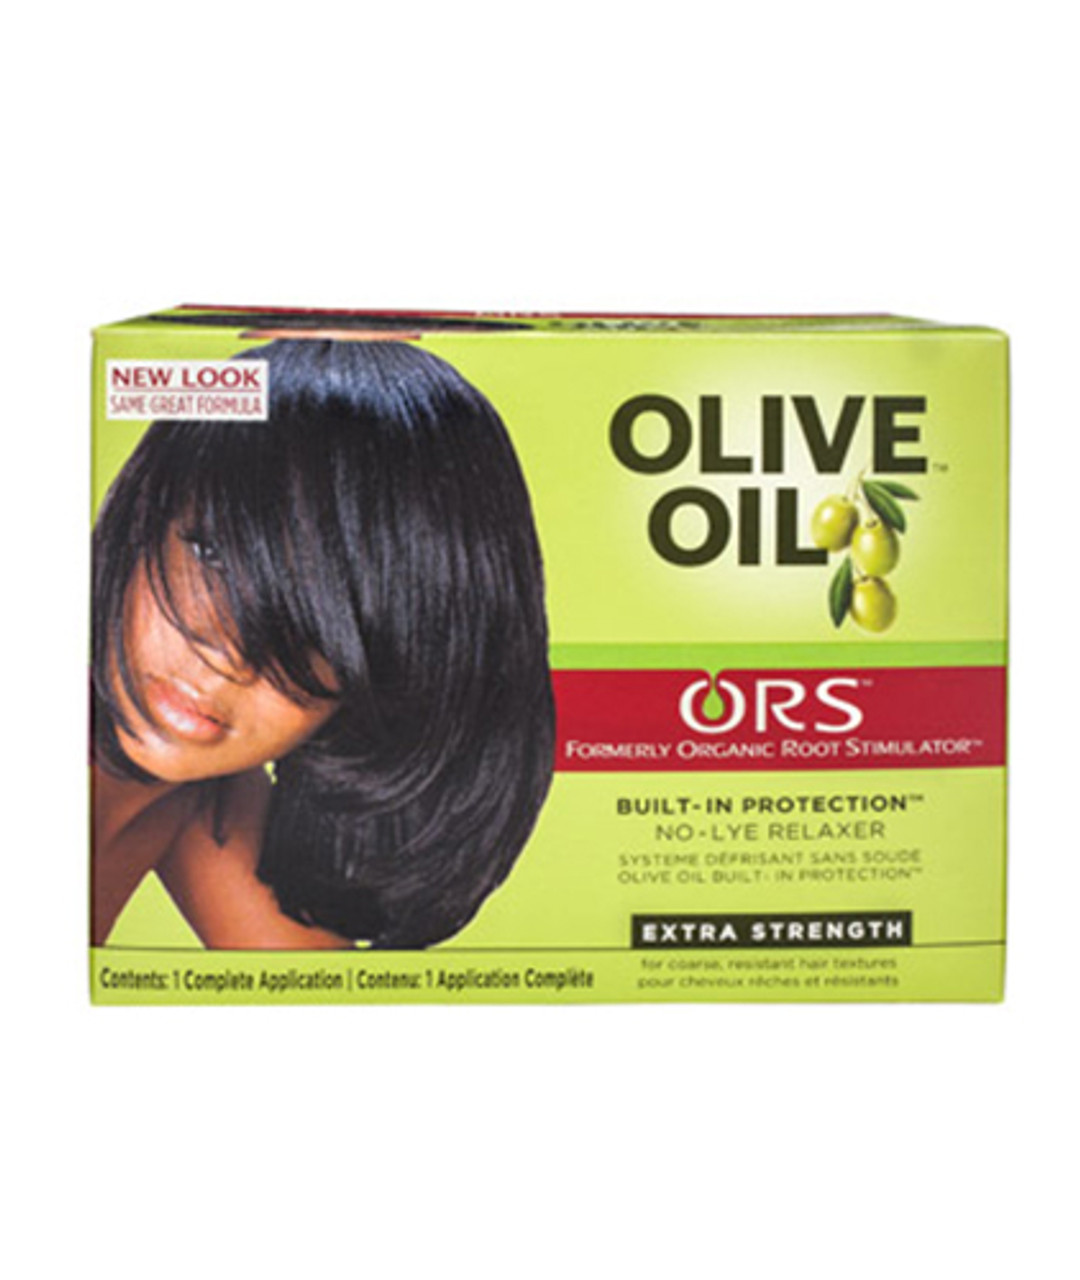 ORS Organic Root Stimulator Olive Oil No Lye Hair Relaxer